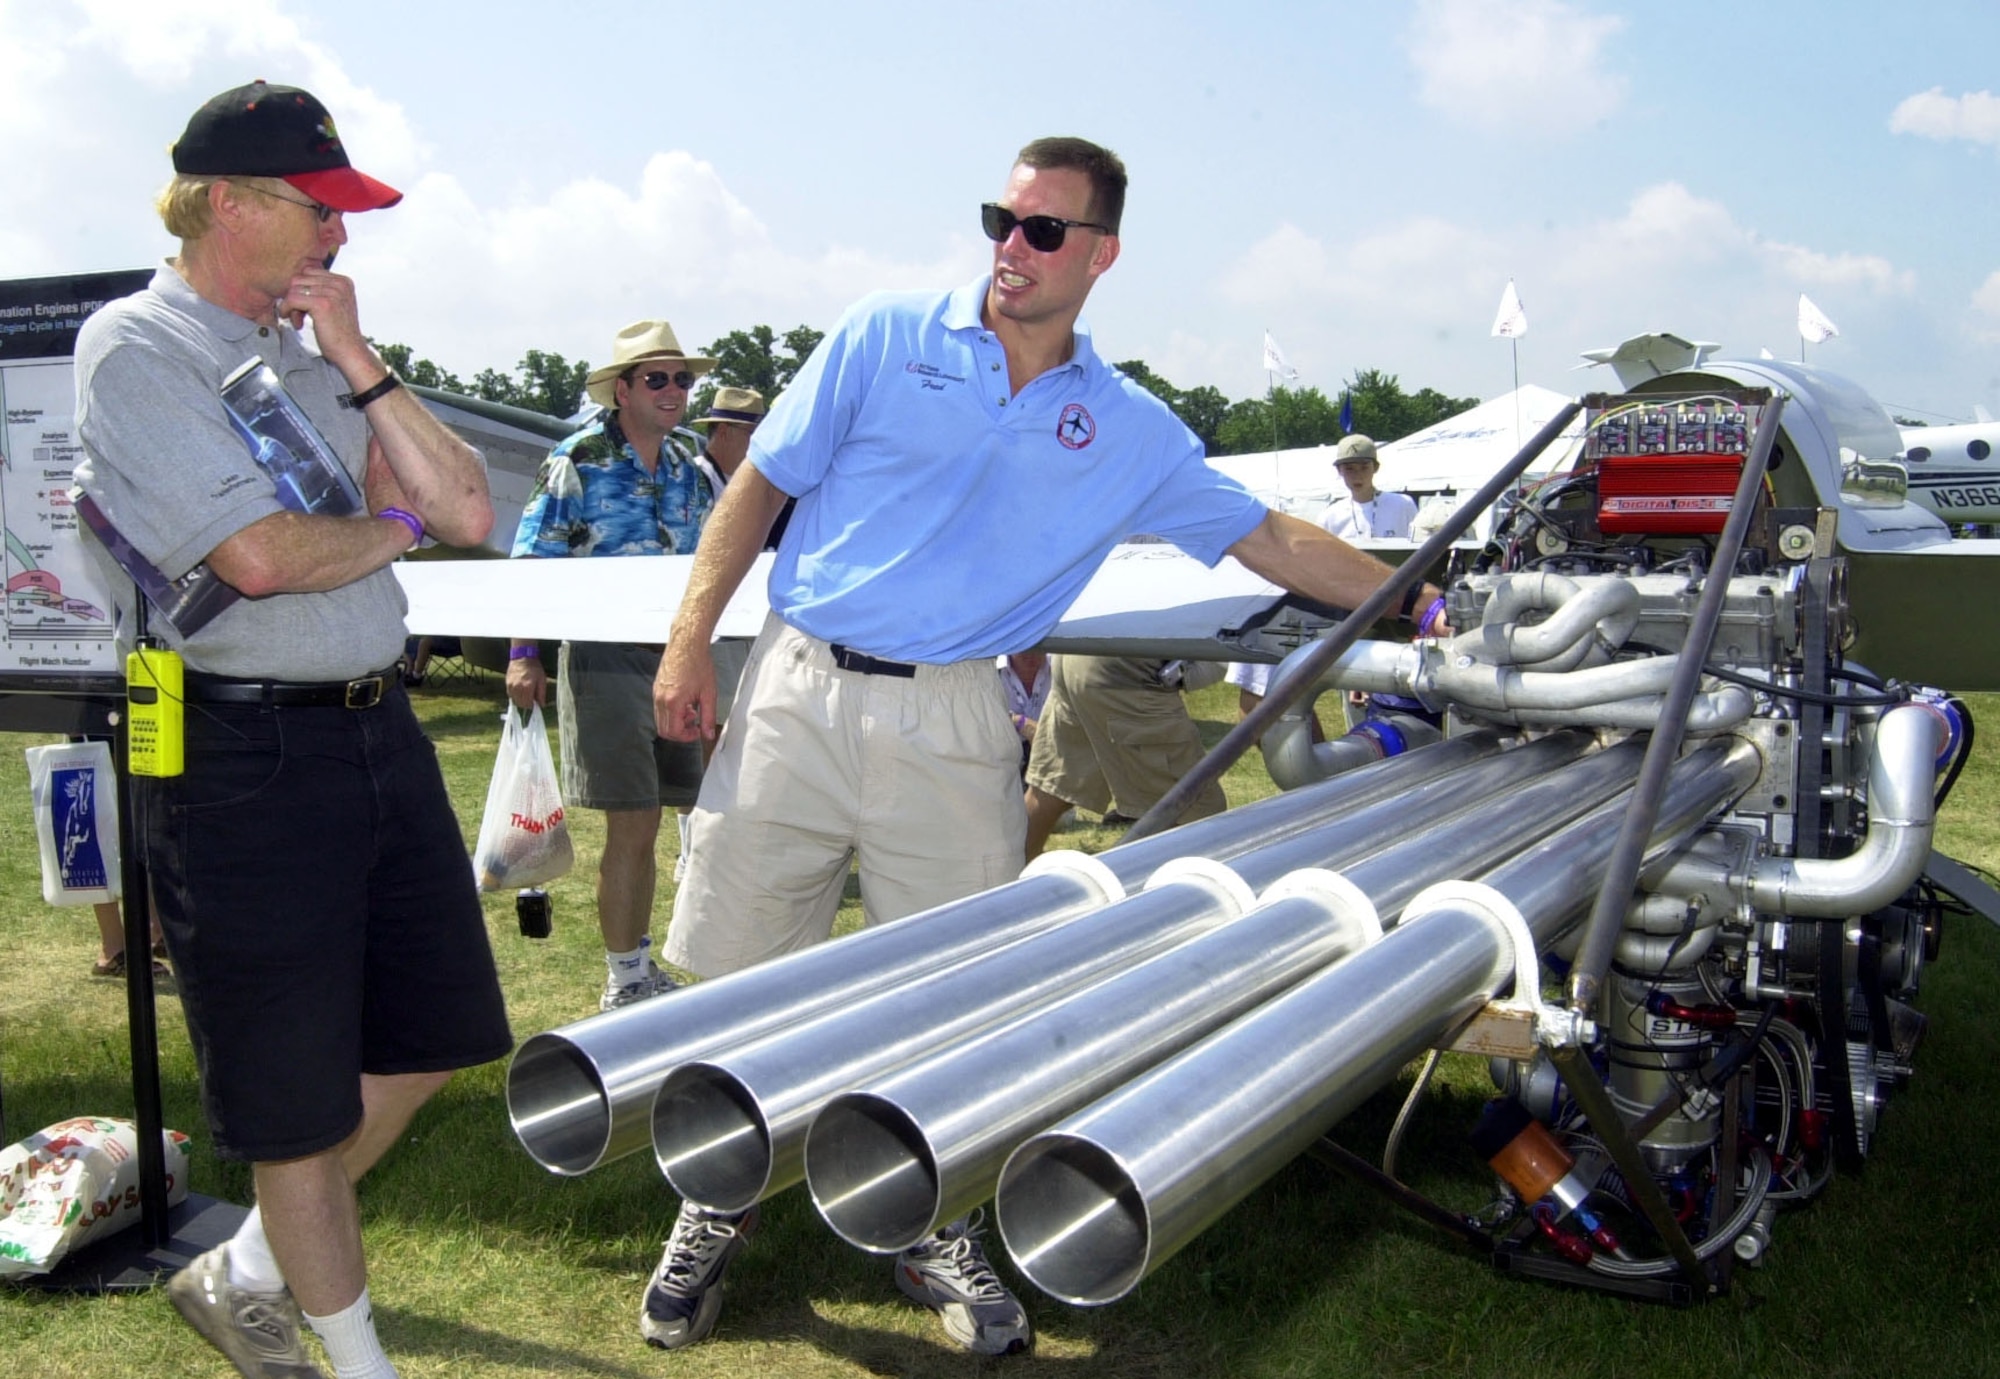 OSHKOSH, Wis. -- Dr. Fred Shauer talks to Experimental Aircraft Association's AirVenture visitors about the pulsed detonation engine the Air Force Research Laboratory from Wright-Patterson Air Force Base, Ohio, has on display.  The engine is a test bed for future engines that will be capable of powering aircraft to speeds of up to Mach 4.  (U.S. Air Force Photo by Bill McCuddy)